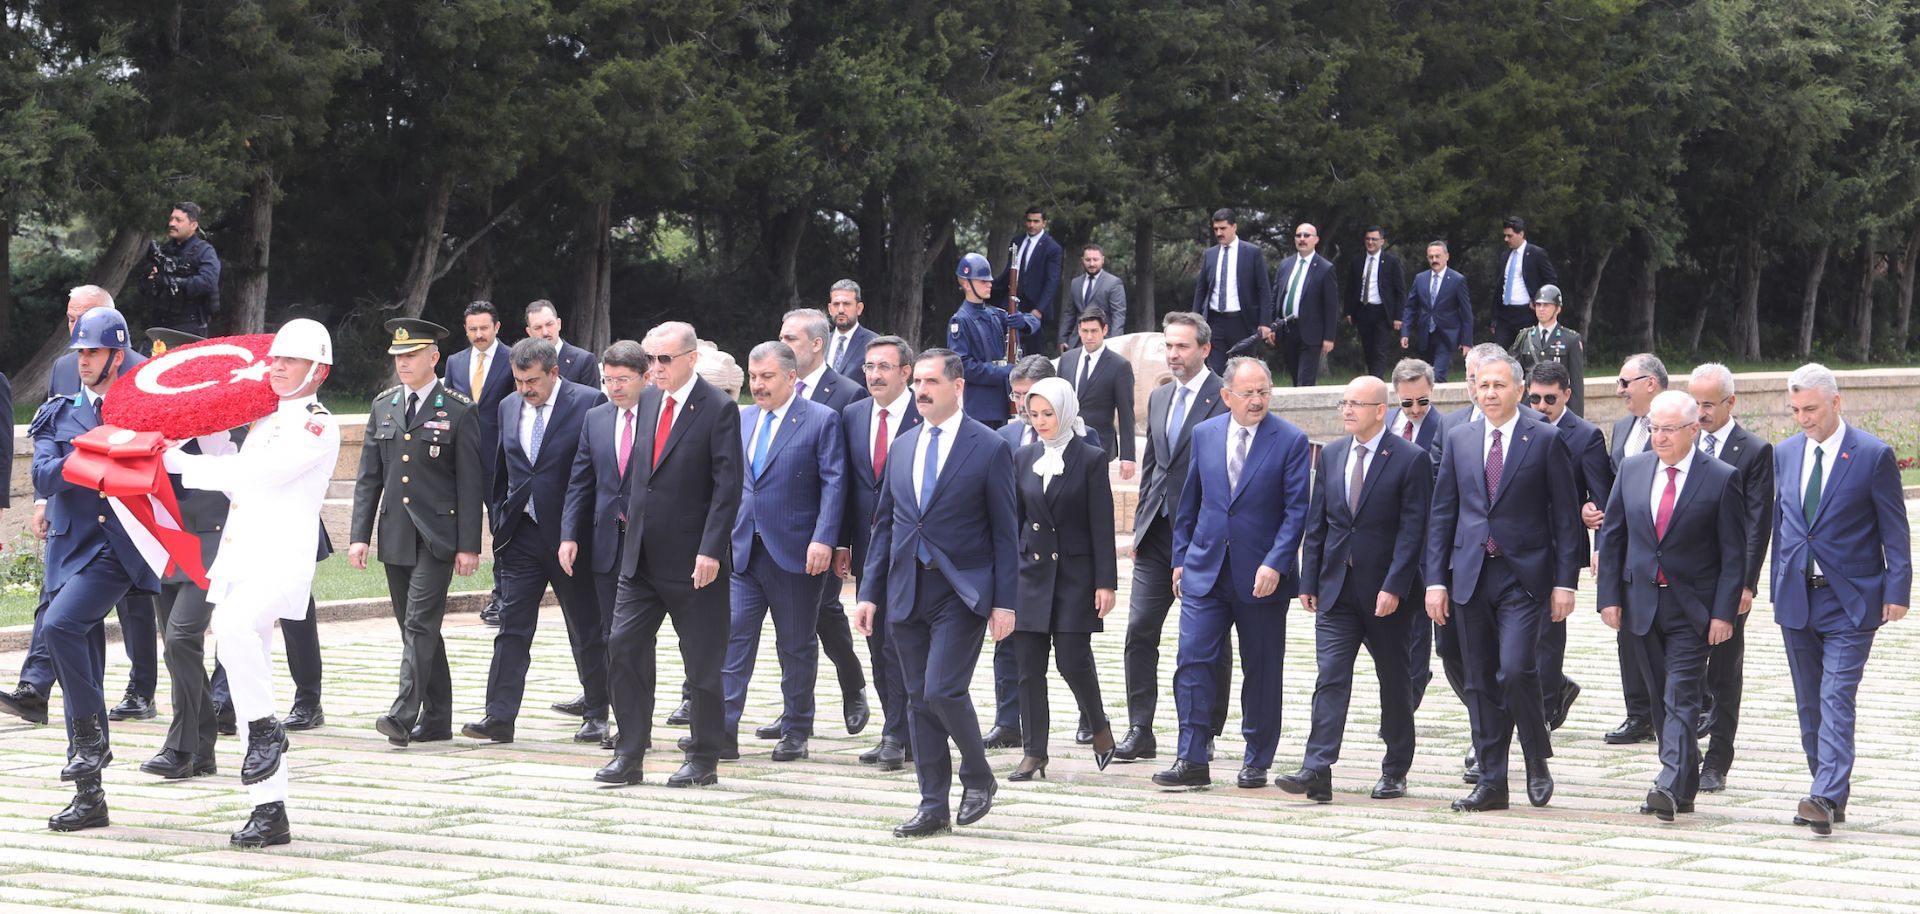 Turkish President Recep Tayyip Erdogan (center left, wearing a red tie) and his newly appointed cabinet members visit the Anıtkabir memorial site in Ankara, Turkey, on June 6, 2023.